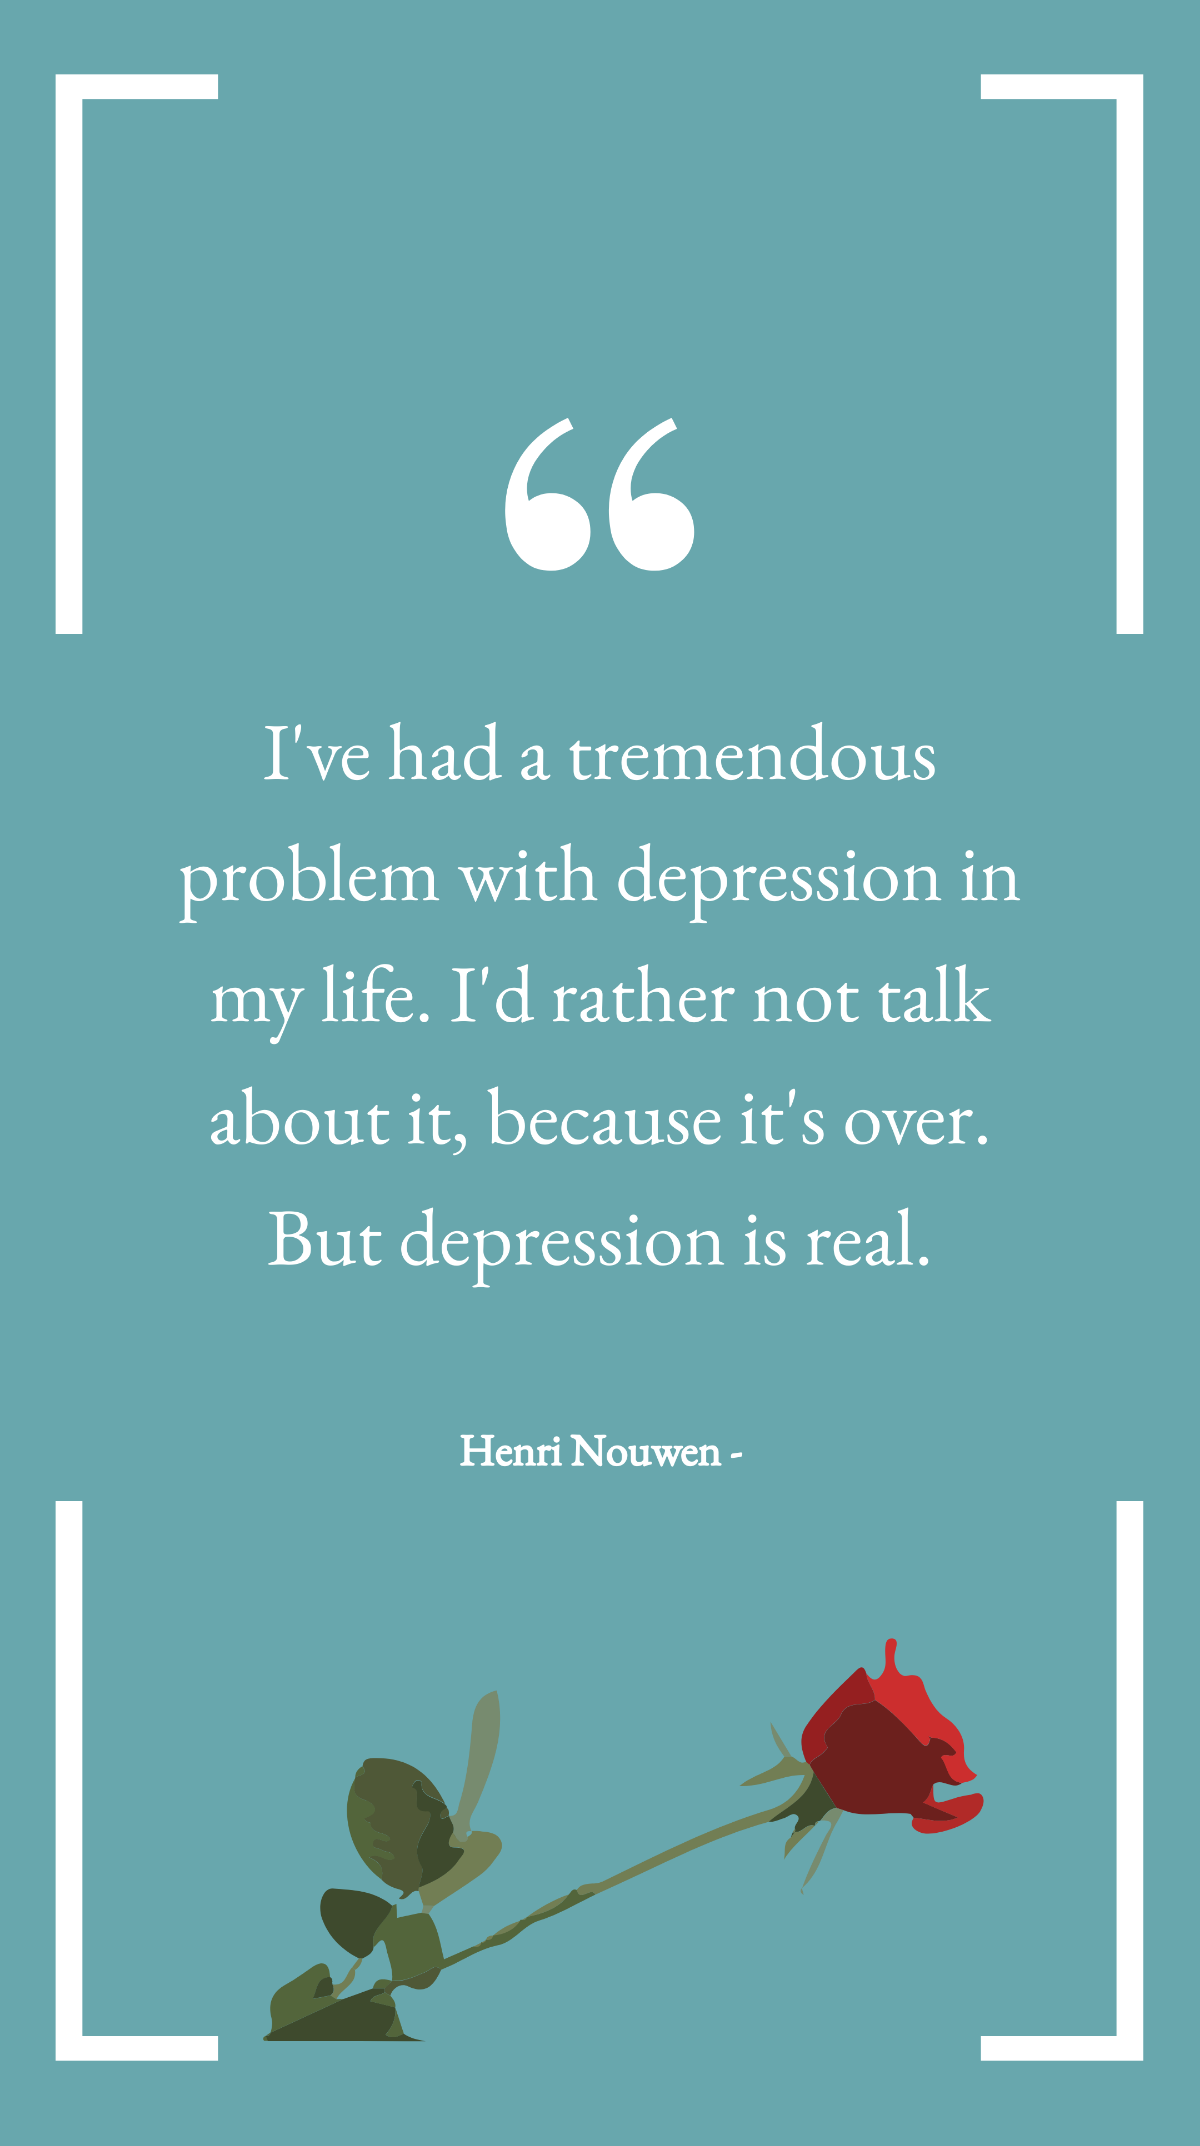 Henri Nouwen - I've had a tremendous problem with depression in my life. I'd rather not talk about it, because it's over. But depression is real. Template